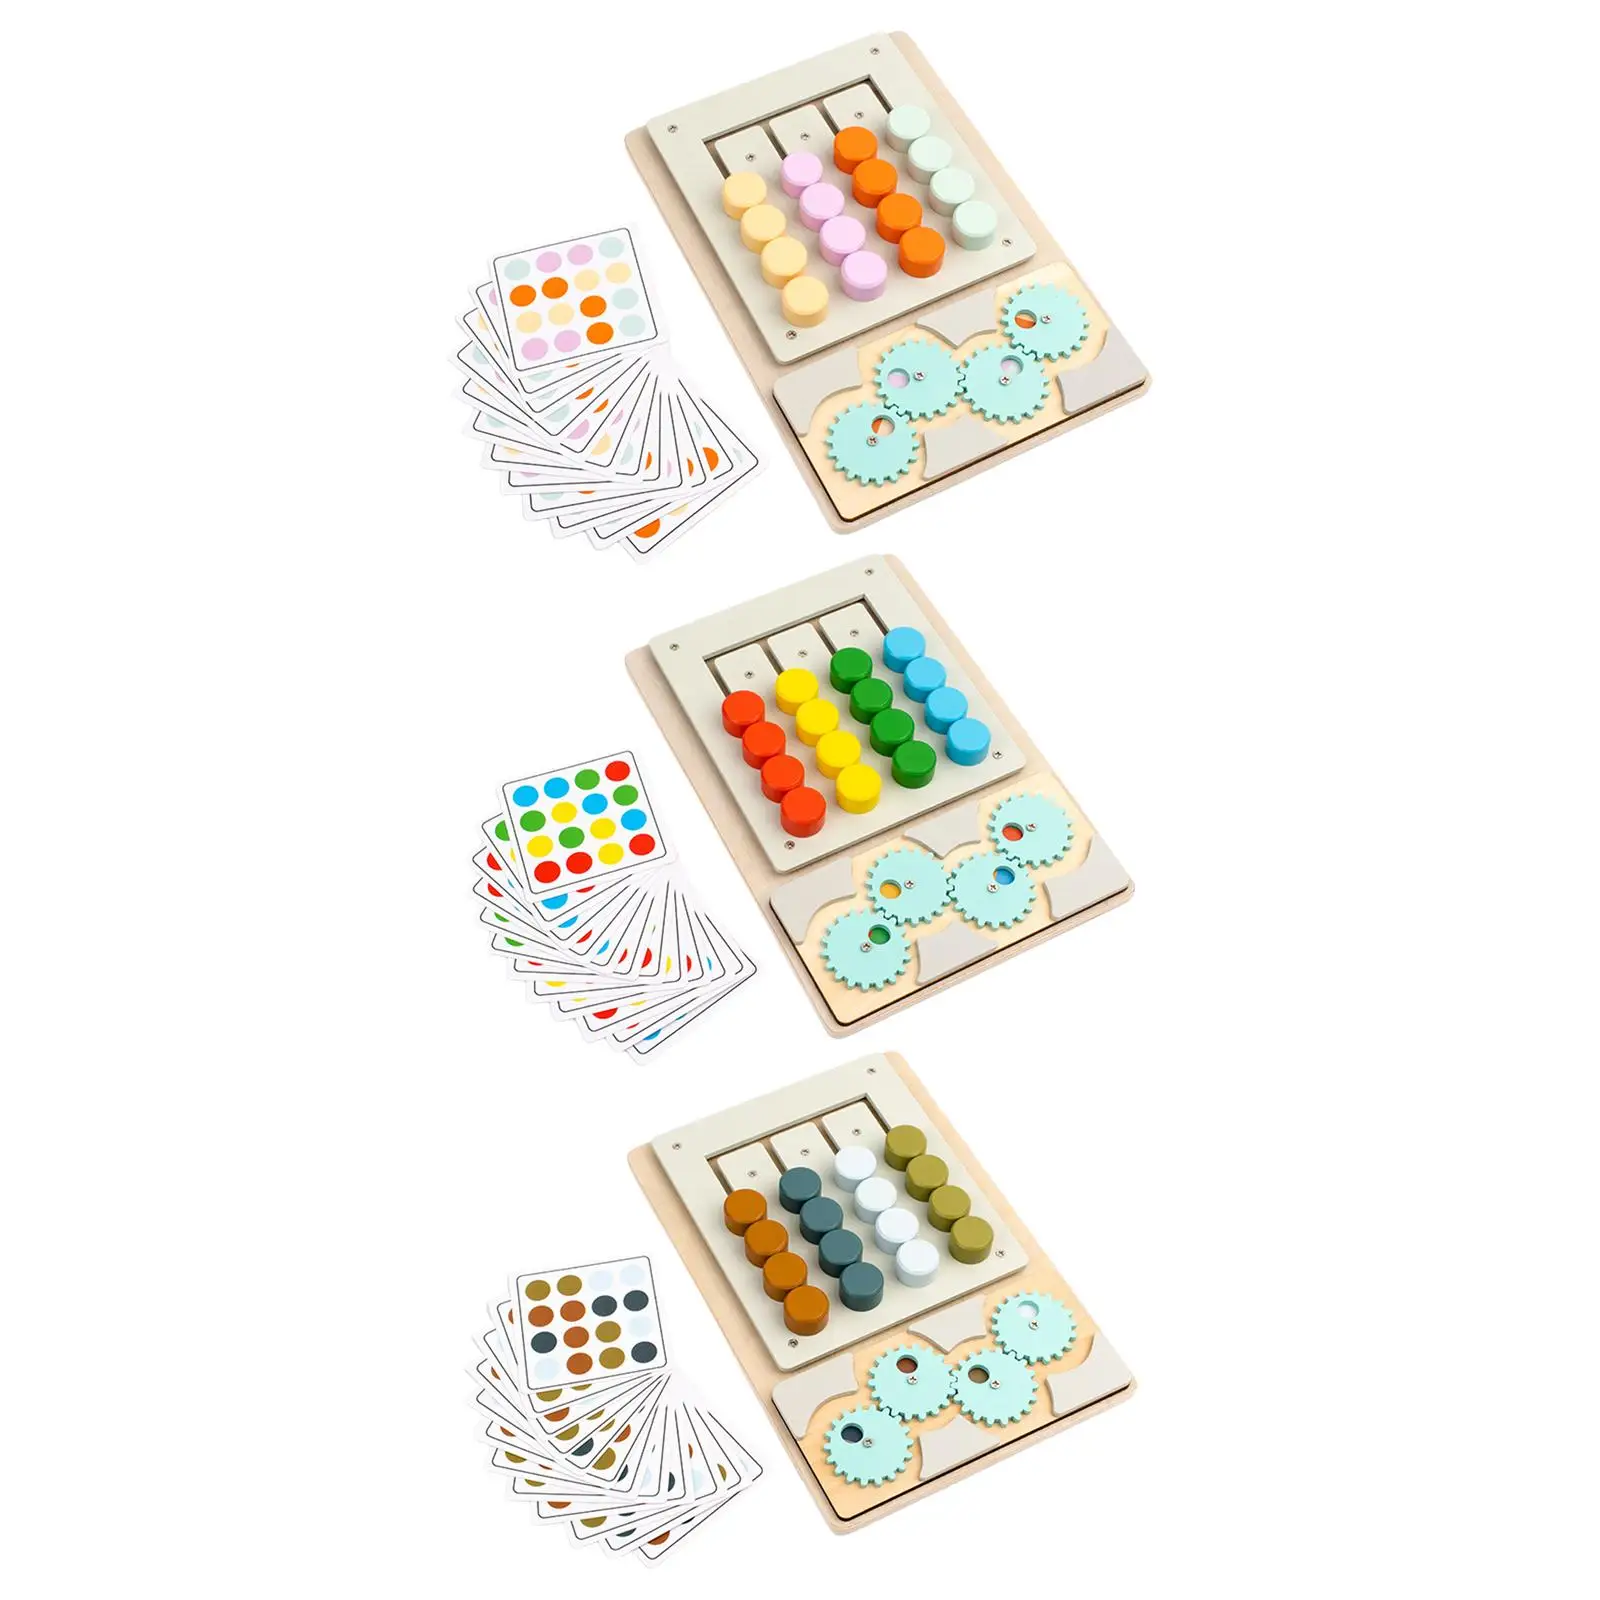 Wooden Slide Puzzle Color Sorting Game Memory Game with 12 Cards Early Educational Four Colors Slide Matching Toy for Boys Girls